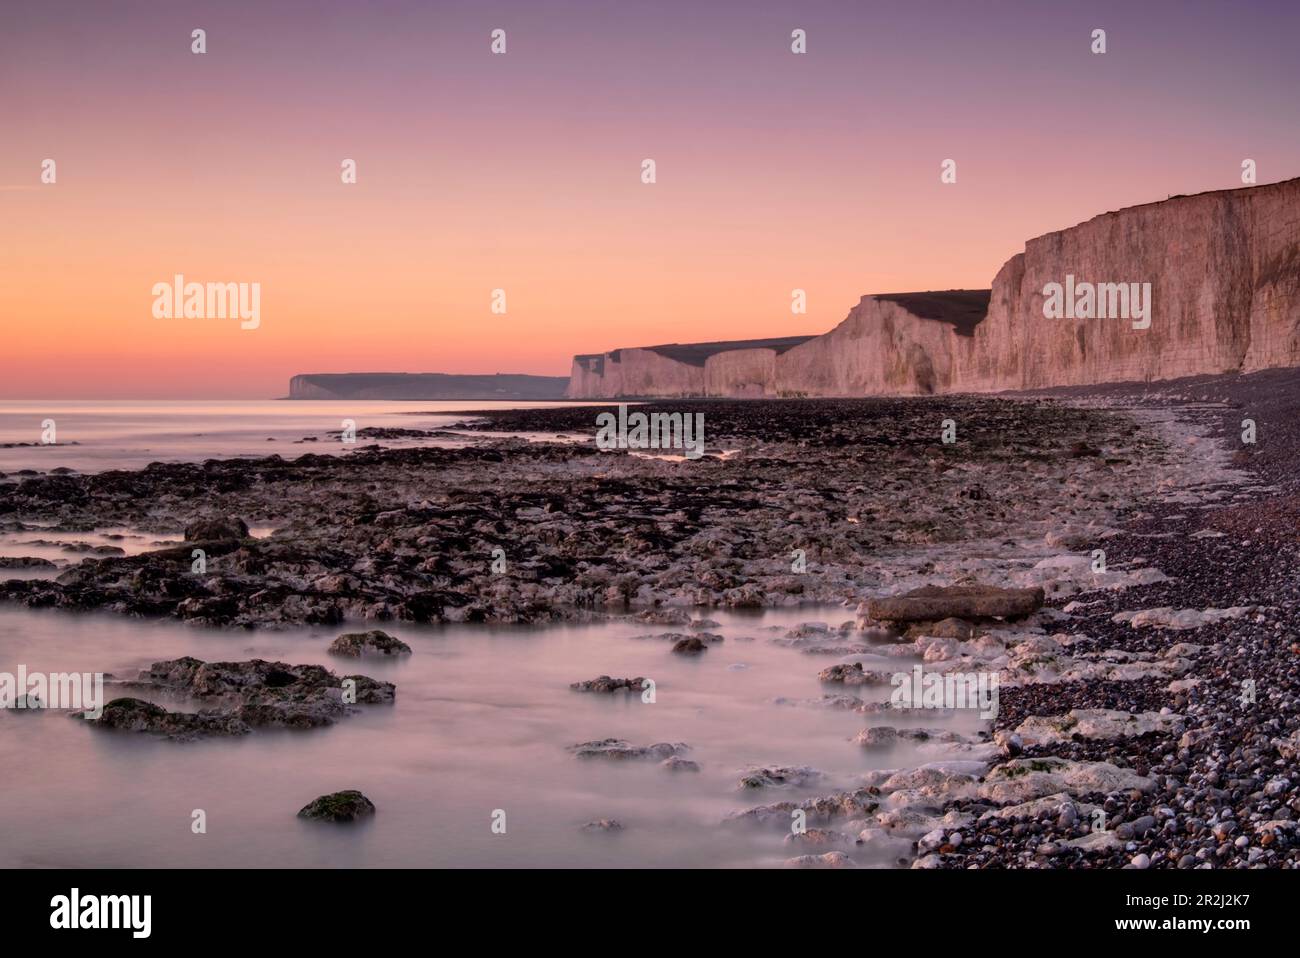 The Seven Sisters white chalk cliffs at sunset, Birling Gap, South Downs National Park, East Sussex, England, United Kingdom, Europe Stock Photo